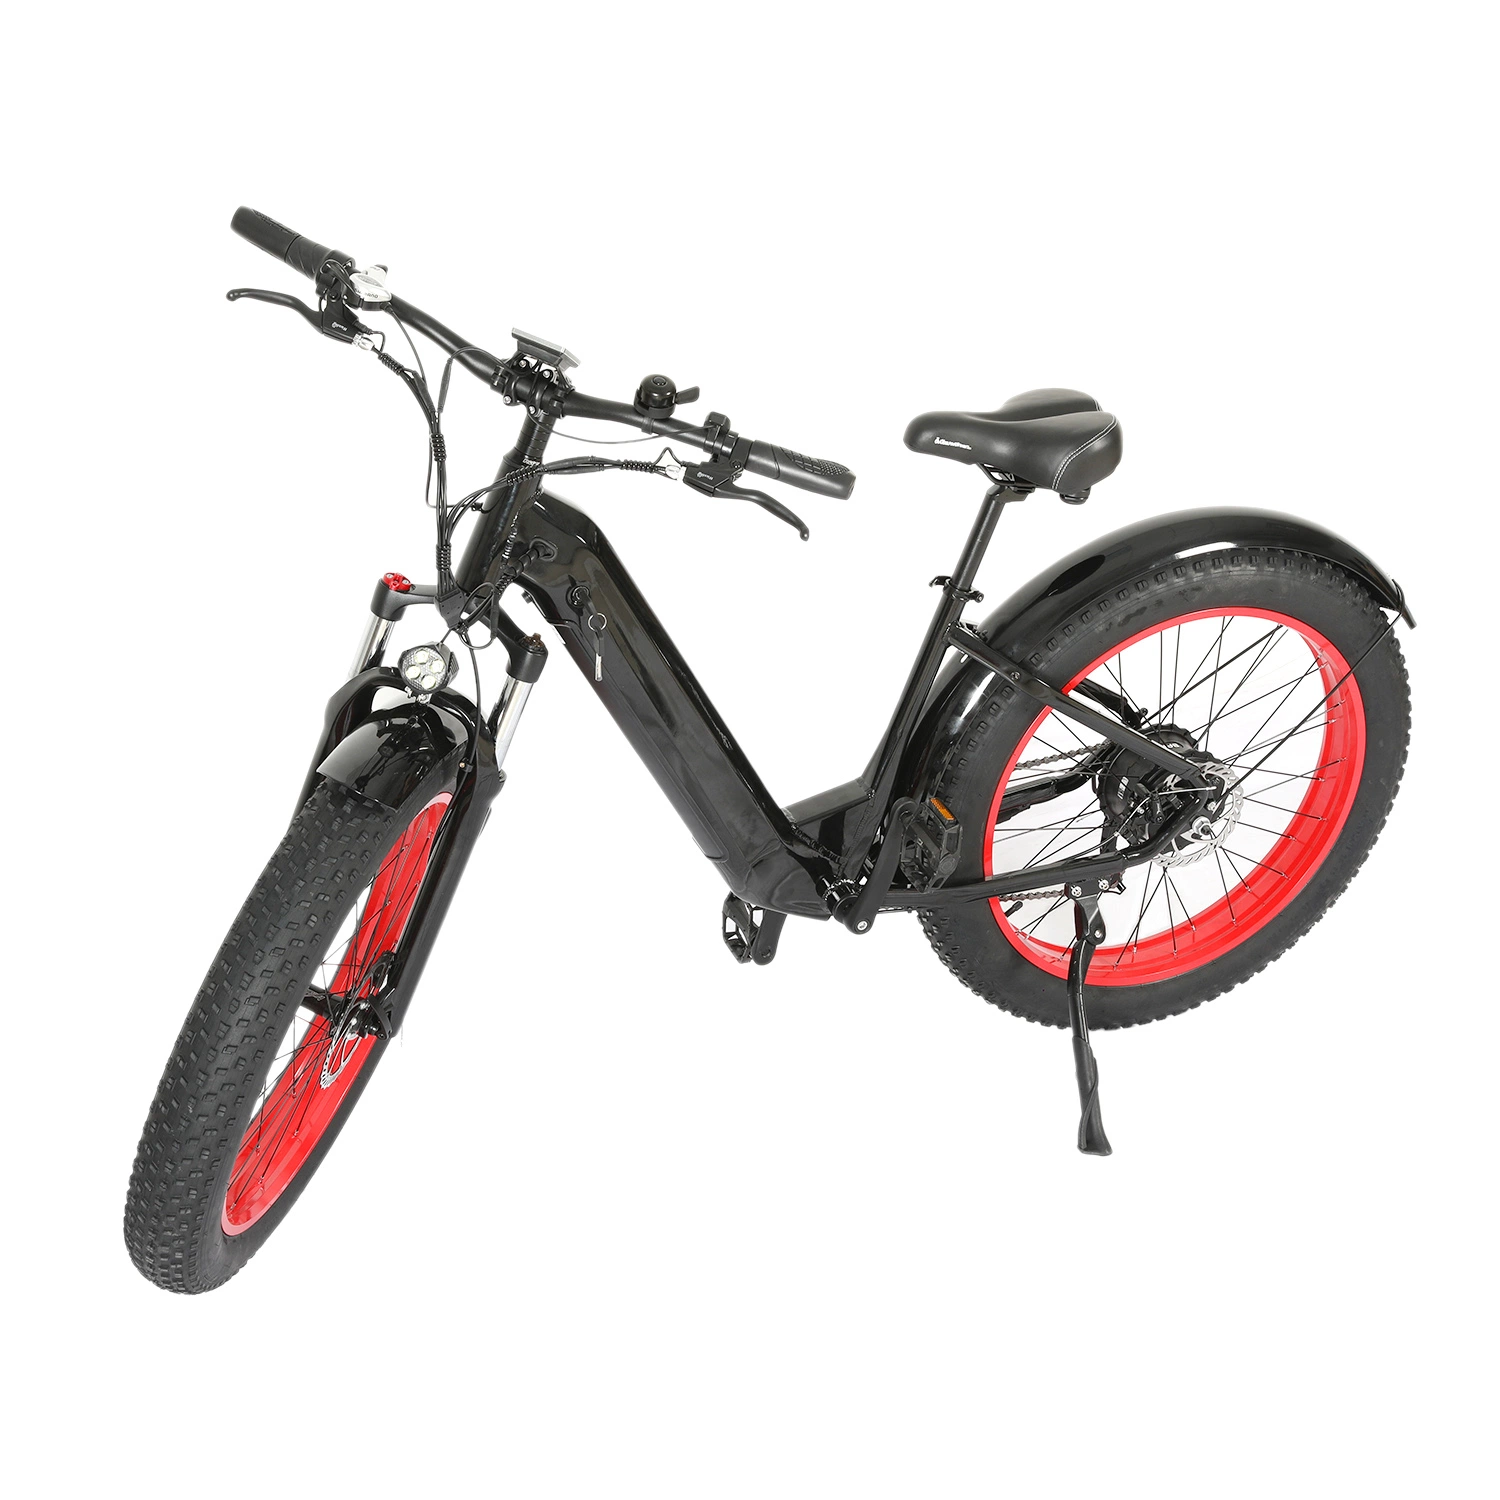 20inch Motorcycle Electric Scooter Bicycle Electric Bike Electric Motorcycle Scooter Motor Scooter Battery 48V 500W Motor Shimano Speed 21 Electric Vehicl Eb-60